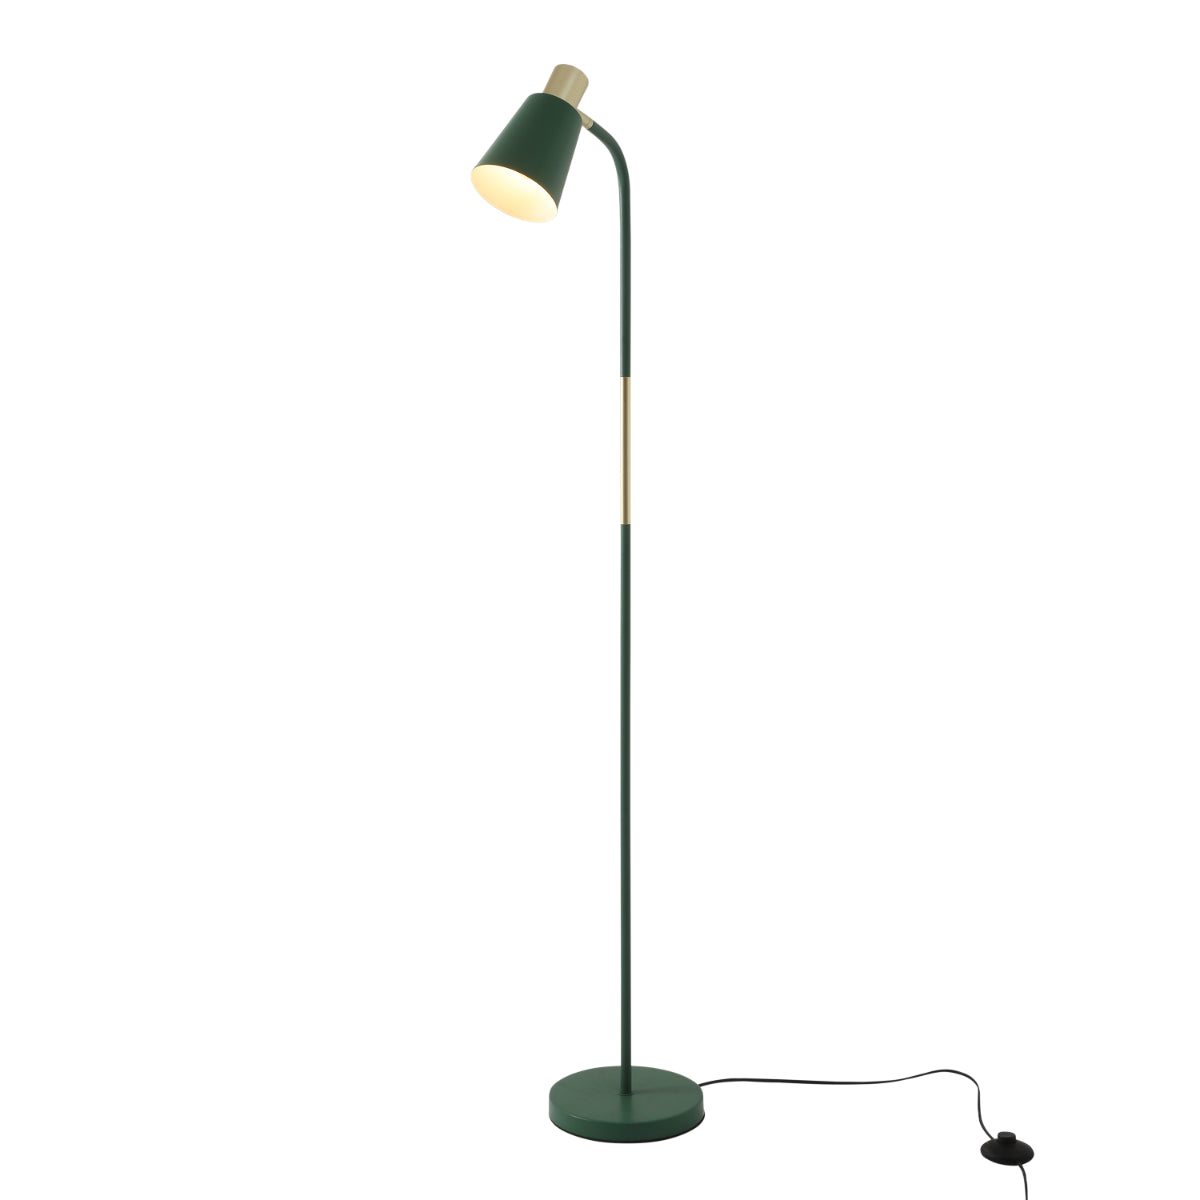 Main image of Bend Design Floor Lamp with Gold Accents - E27 130-03556